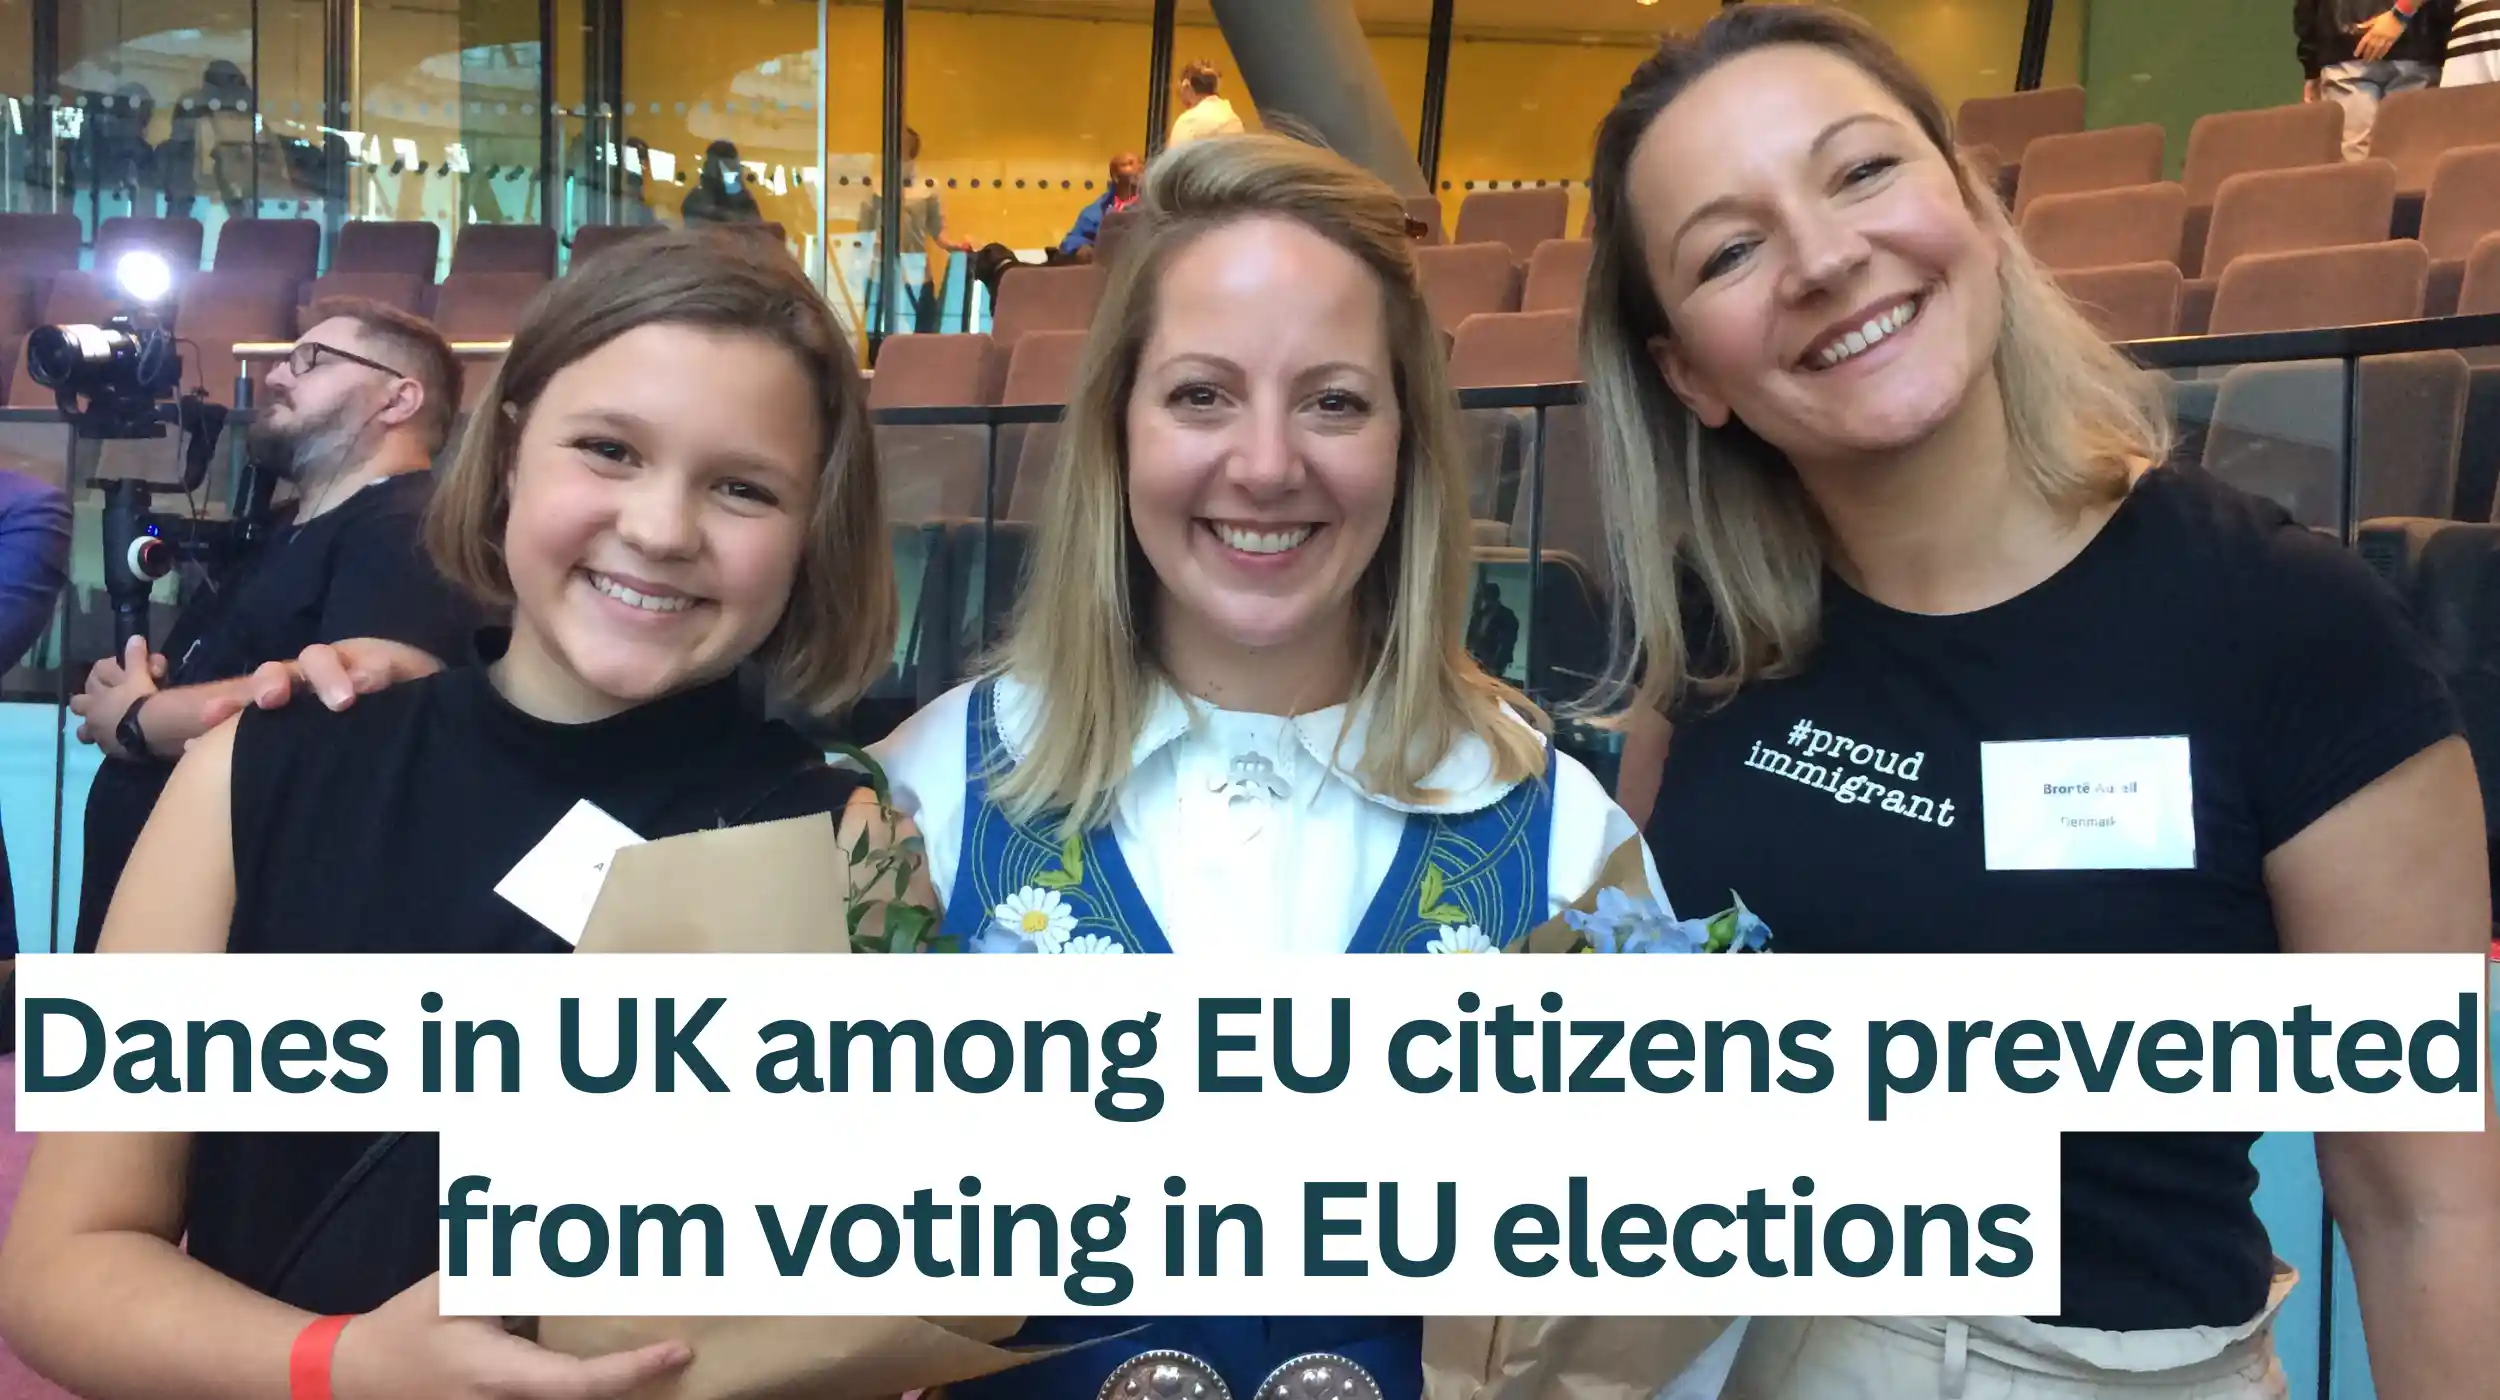 Danes-in-UK-among-EU-citizens-prevented-from-voting-in-EU-elections